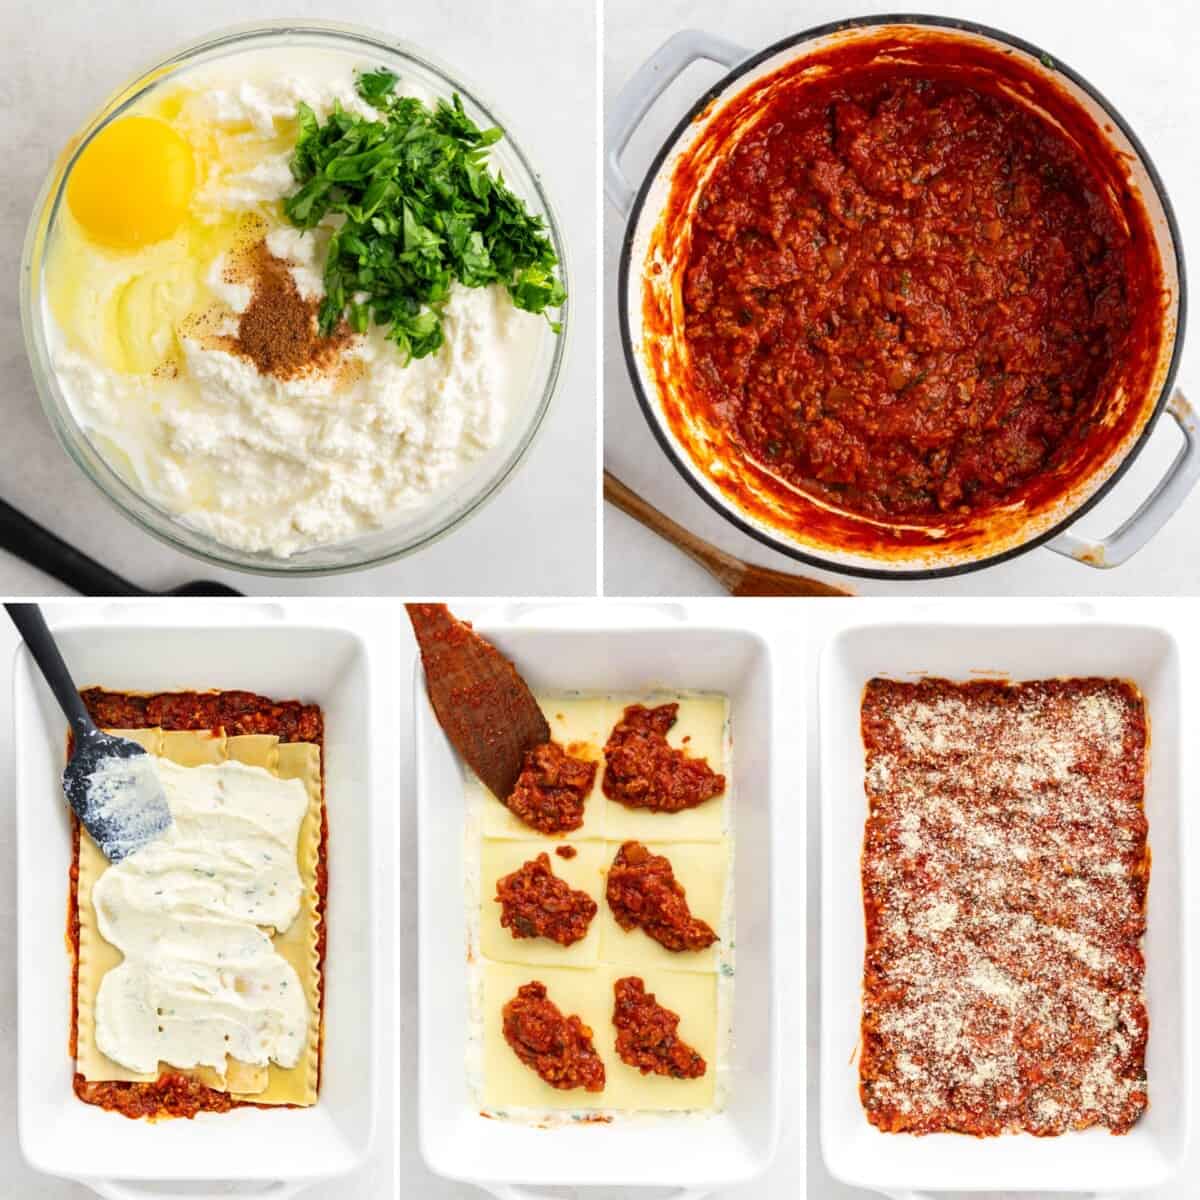 A collage of five images showing the process of how to make the sauce and then assemble a homemade lasagna.